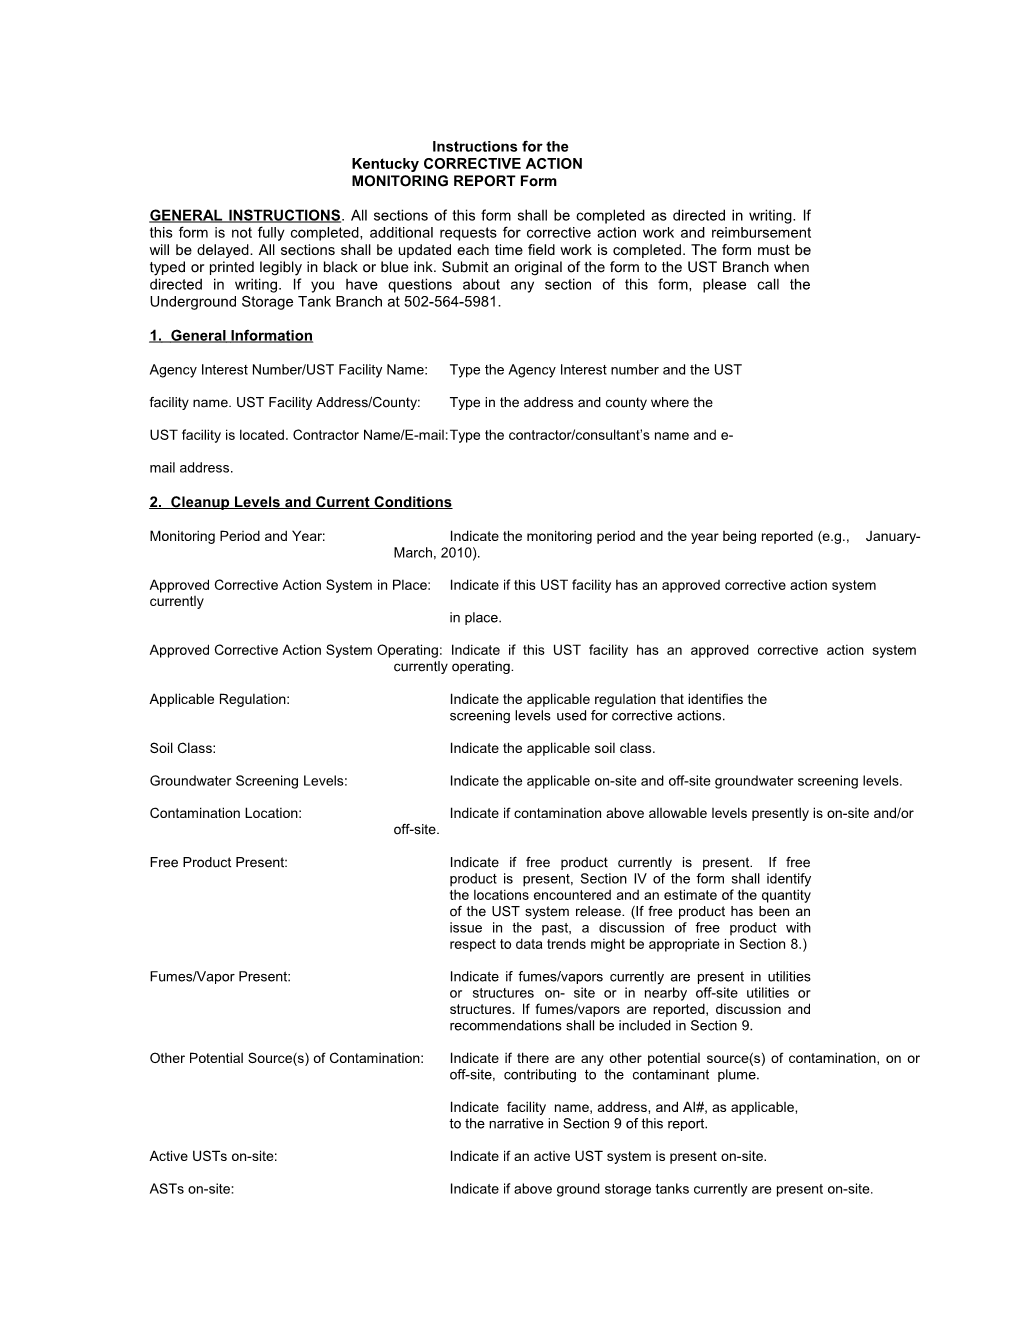 DEP8045 Corrective Action Monitoring Report Form with Instructions